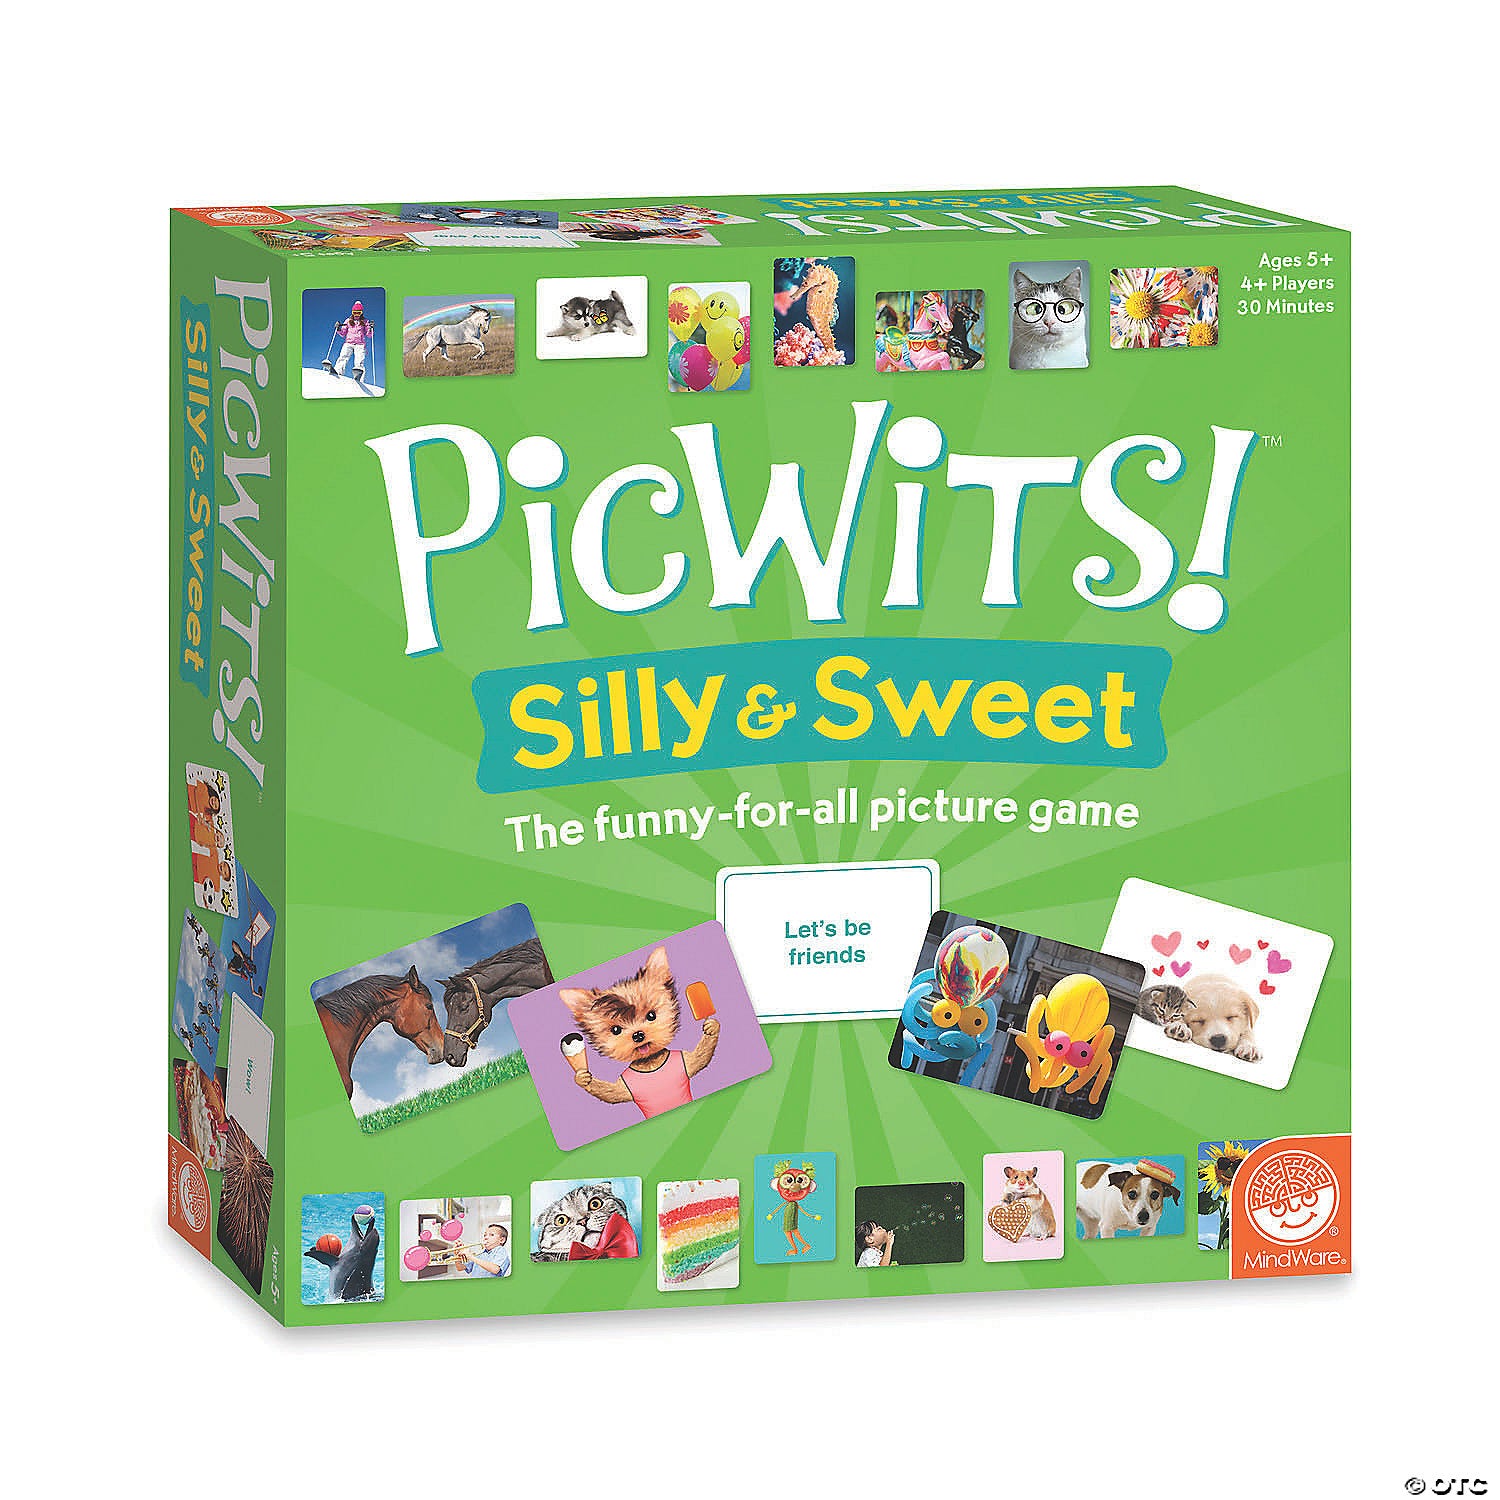 Picwits - Silly & Sweet    